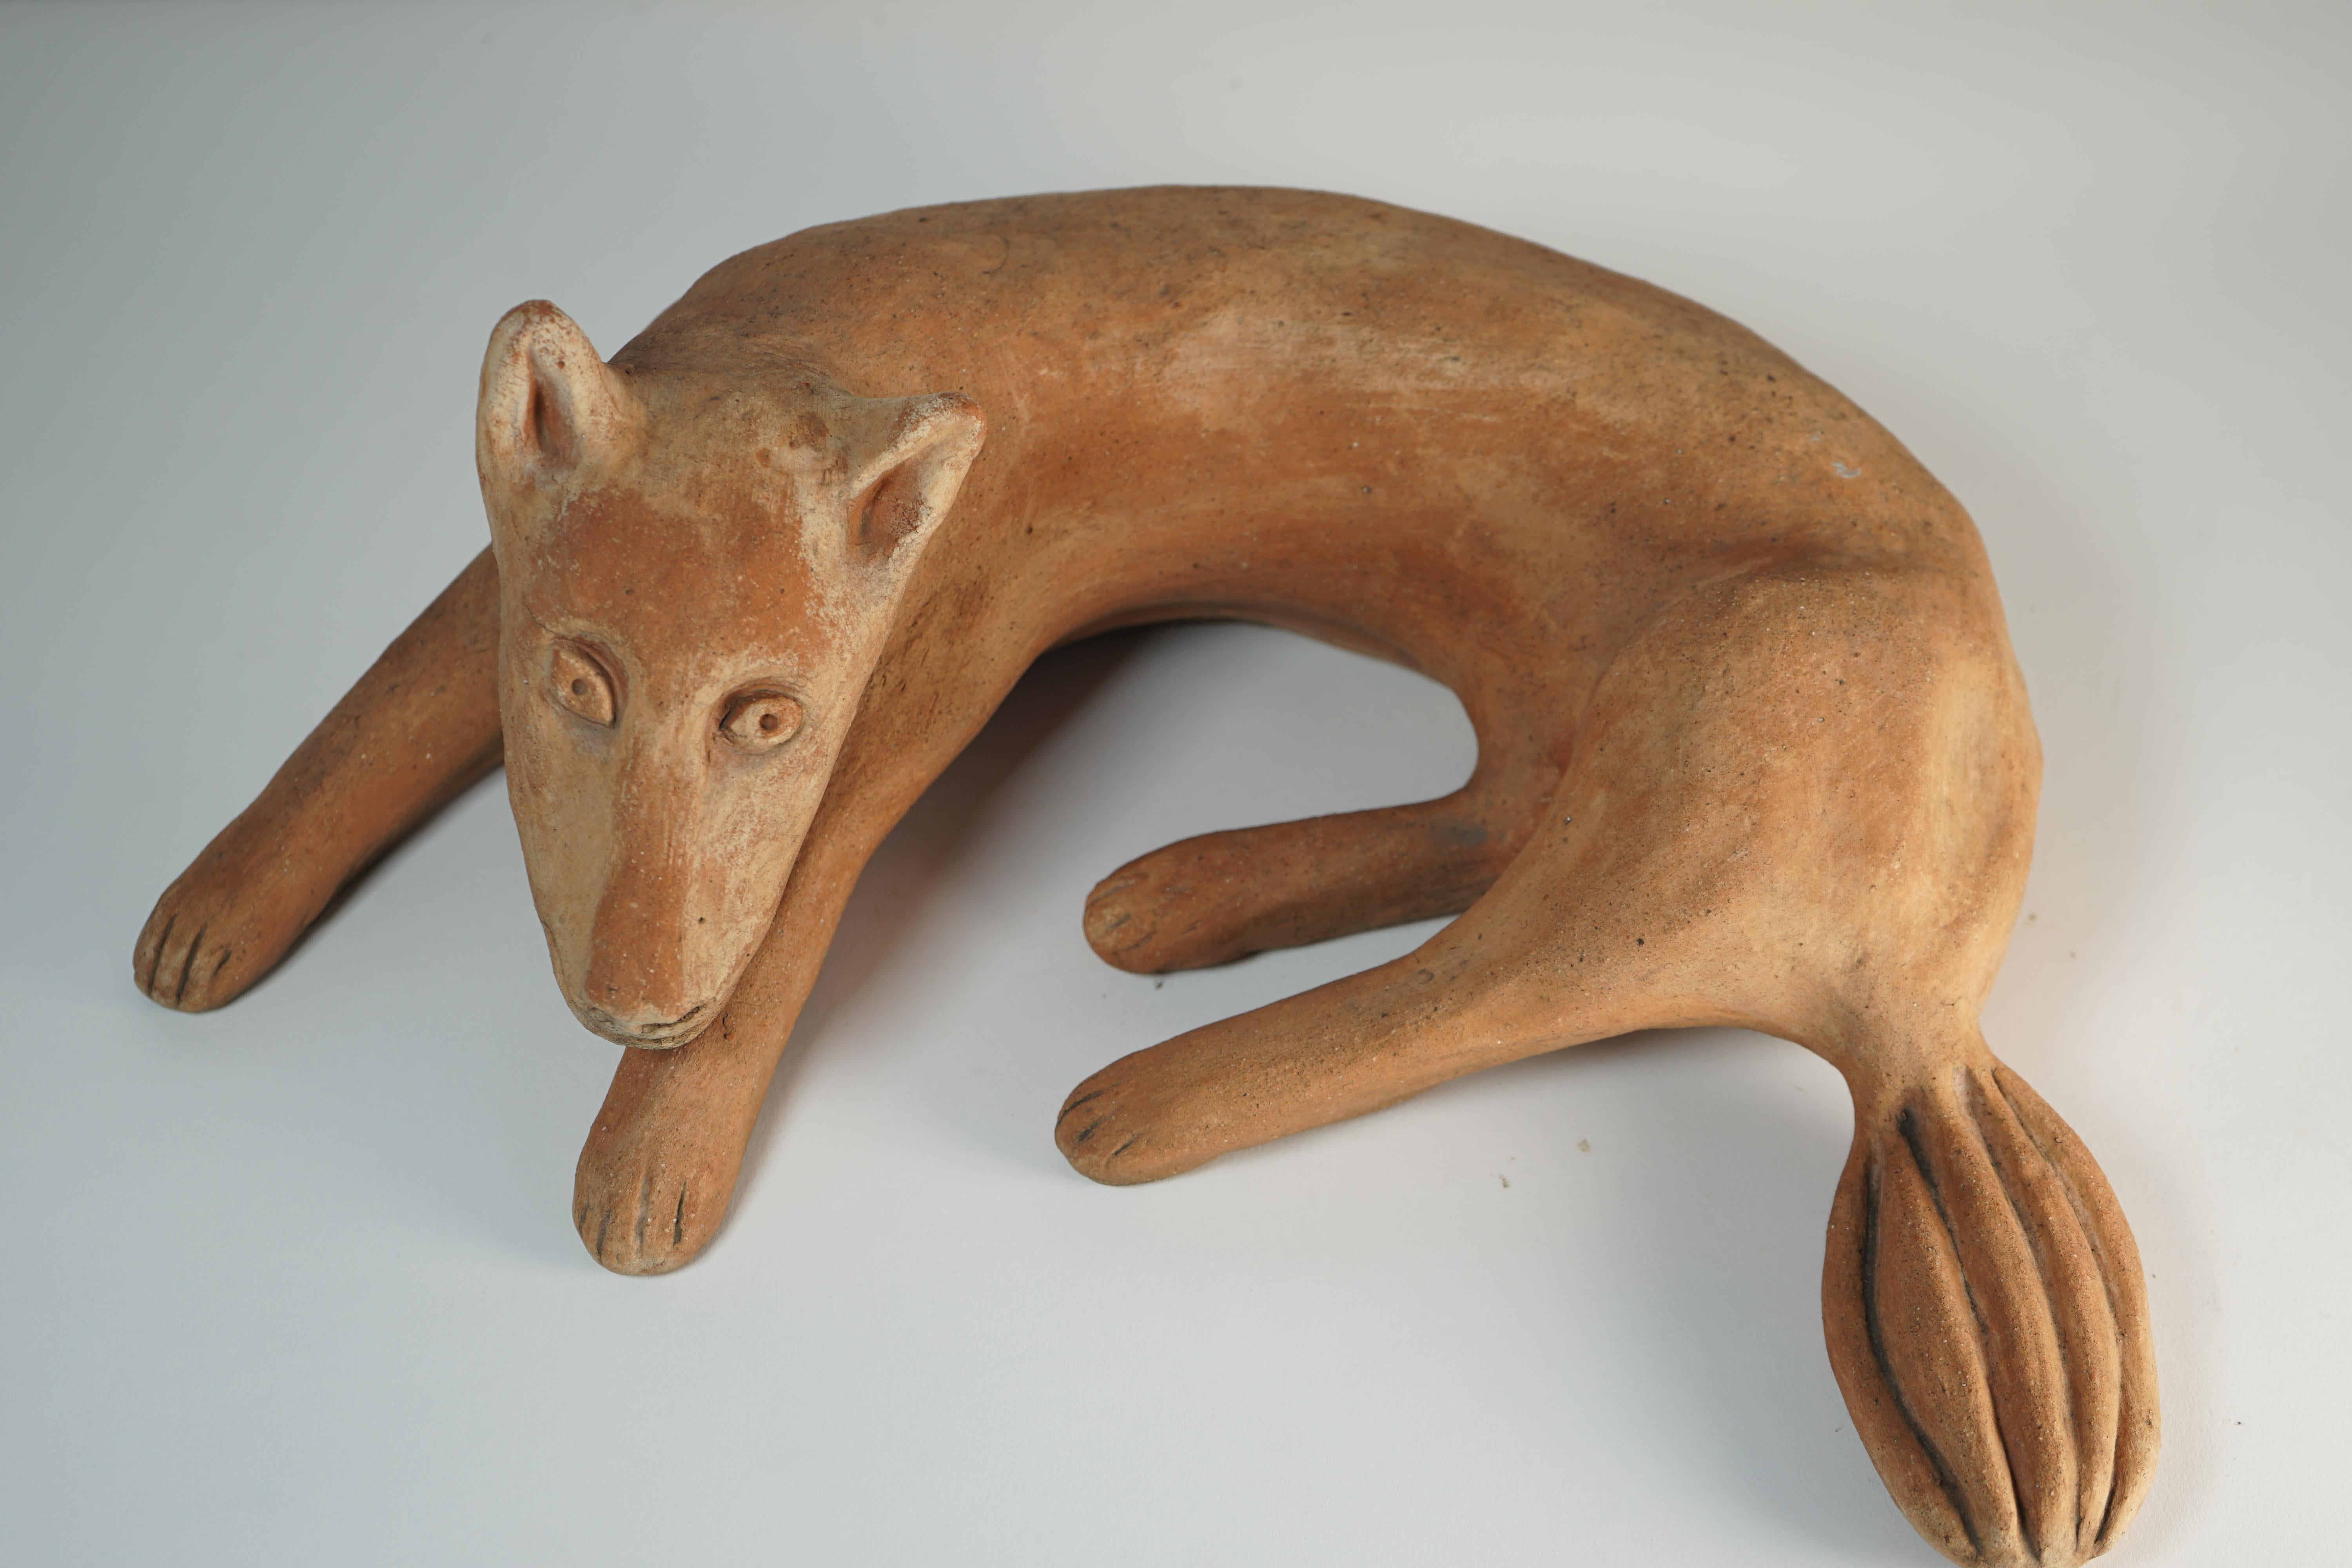 Ceramic sculpture model Fox designed by Nathalie Du Pasquier and produced by Alessio Sarri in 1993. Engraved in the pottery, signature of the artist and manufacturer.
The fox is part of a series of sculptures made up of 7 different animals.
Title